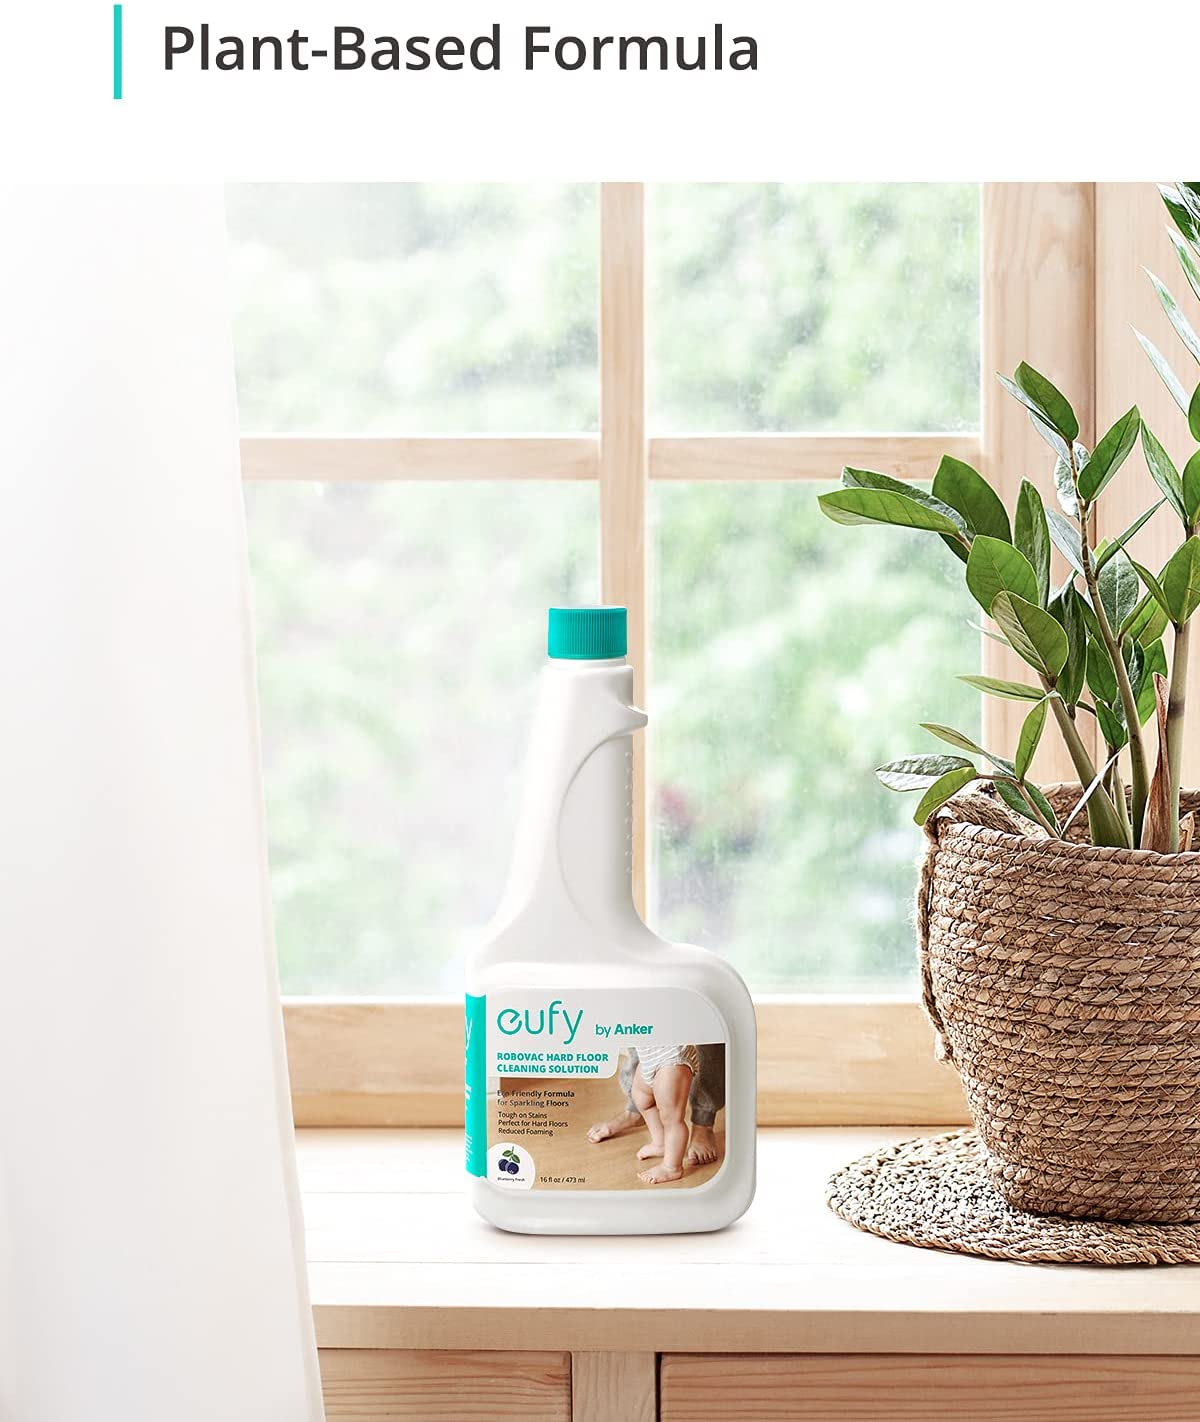 Plant-Based Home Cleaning Full Set | Wipes for Surfaces, Screens, & Floors